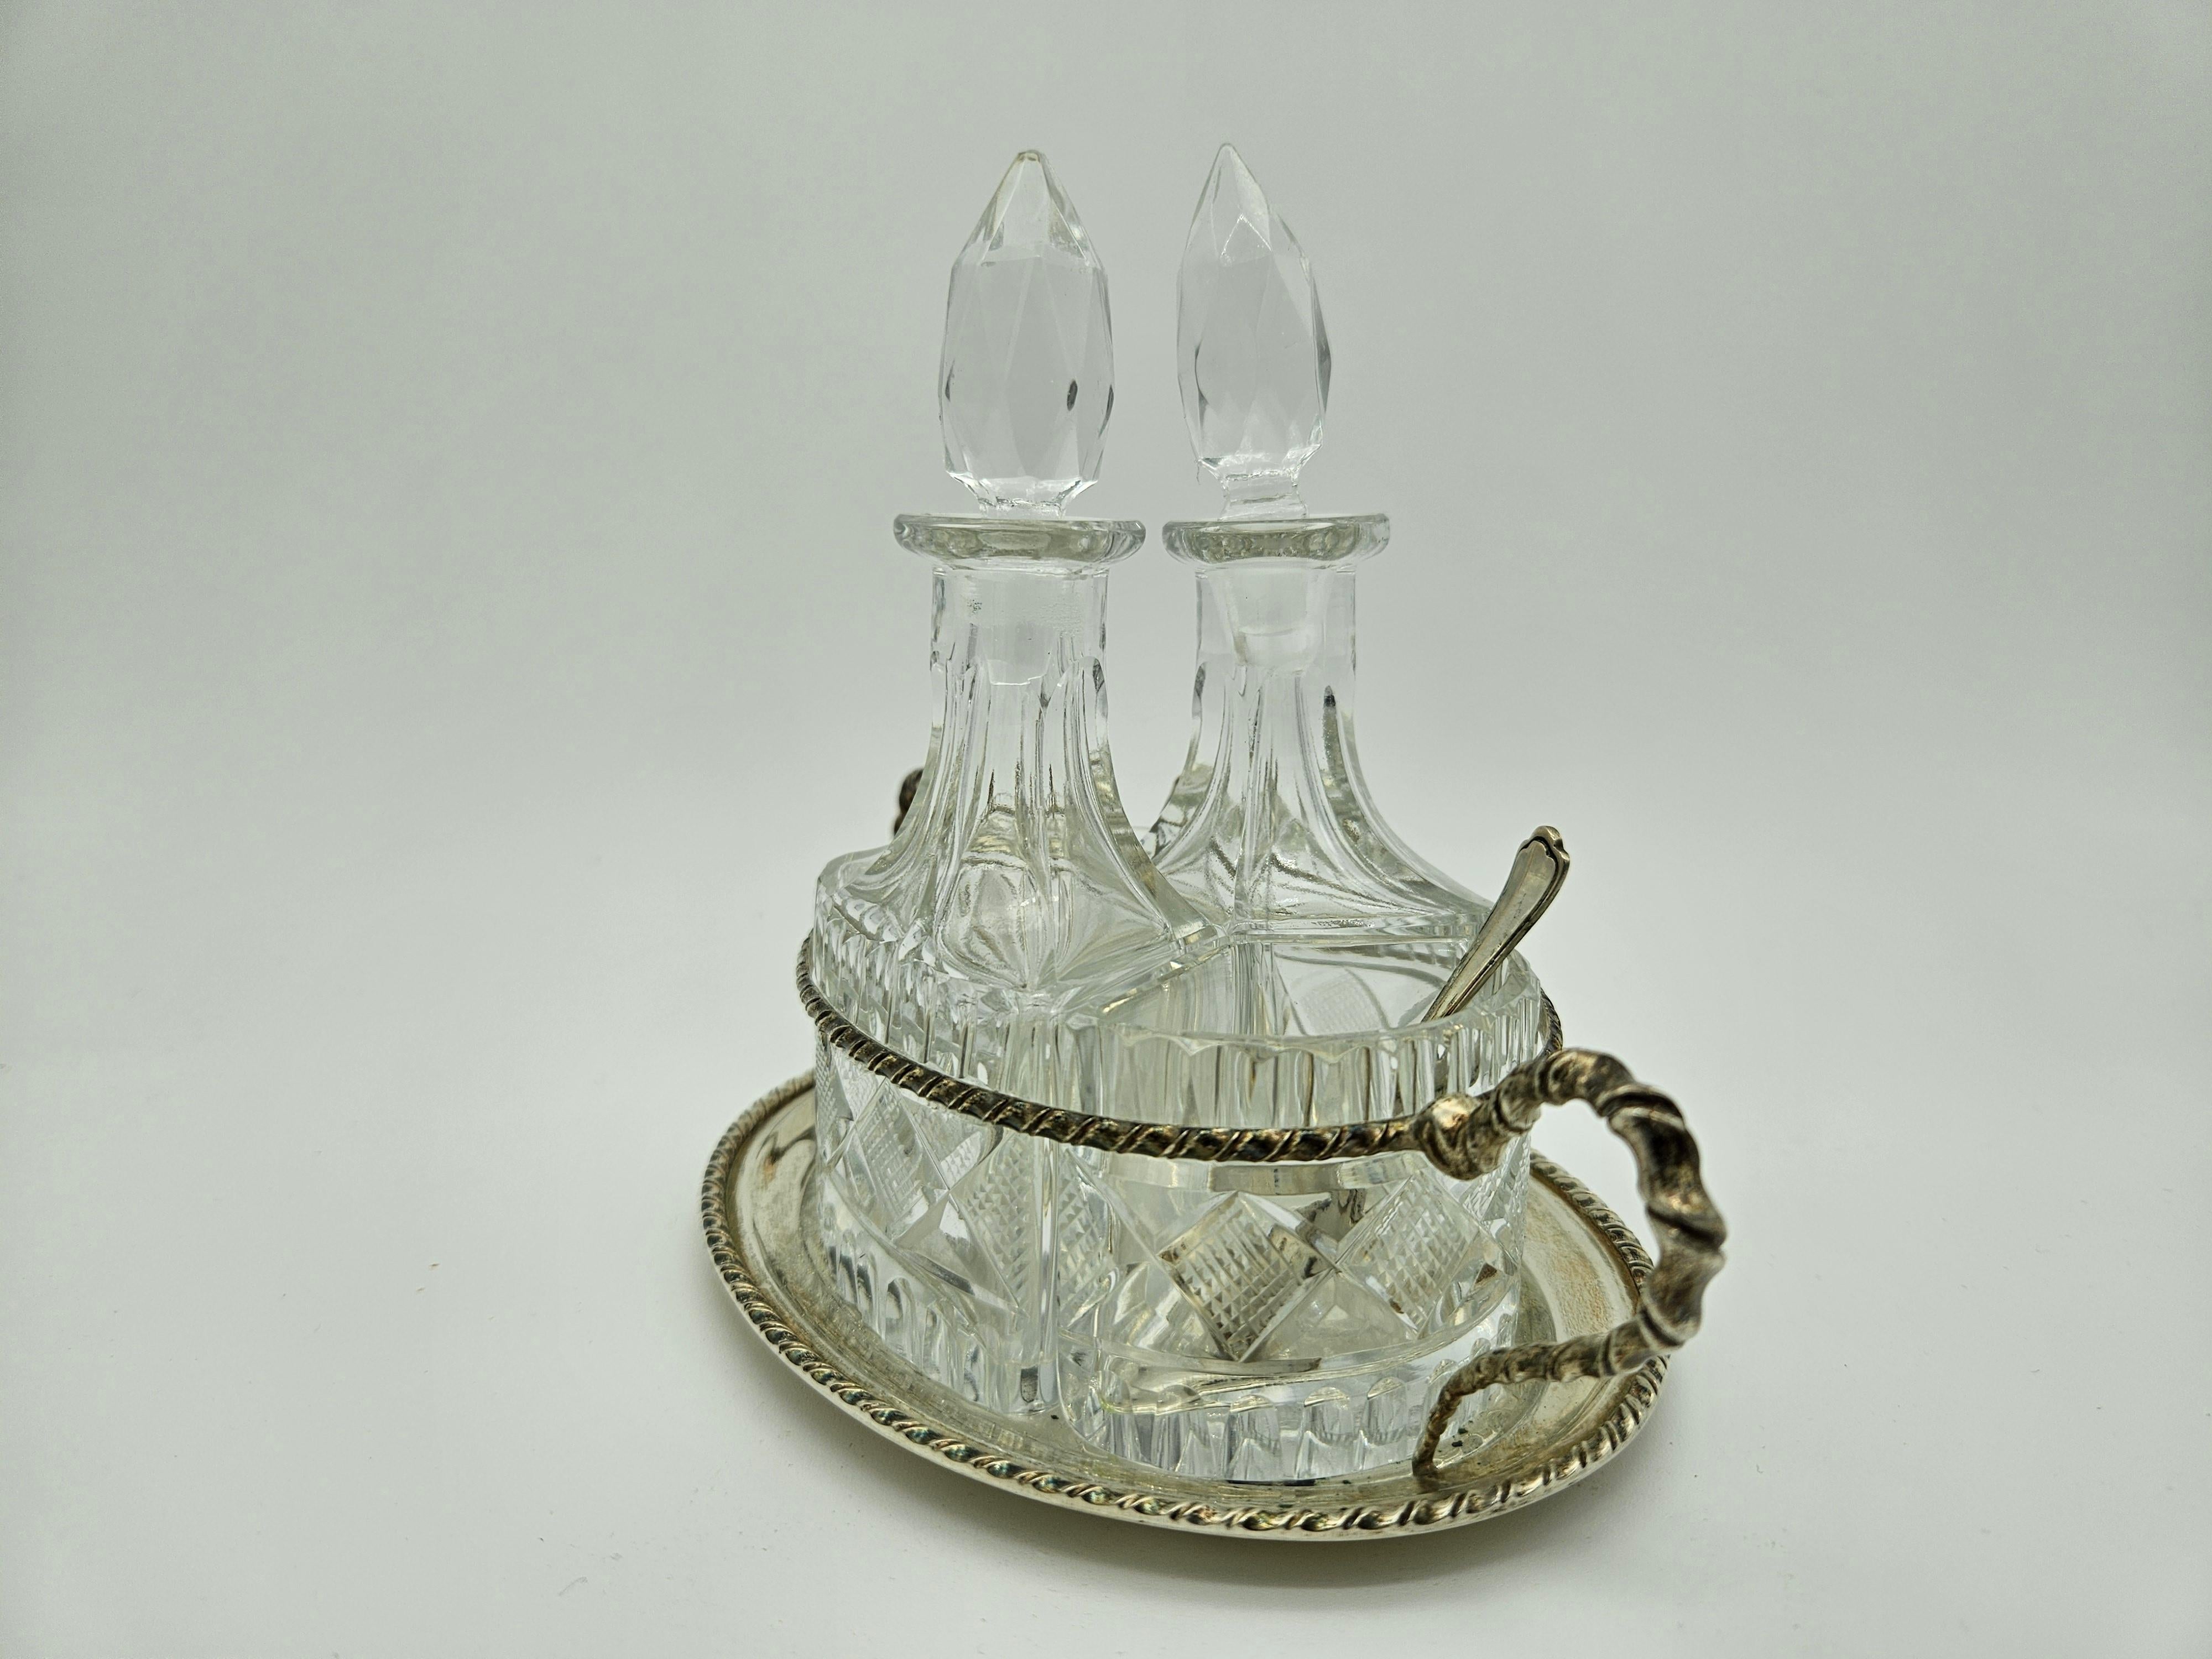 Oil and vinegar set with two jars and spoons, probably 20th century Italian production .
Glass and silver.

The set shows normal signs of wear due to age and use.
